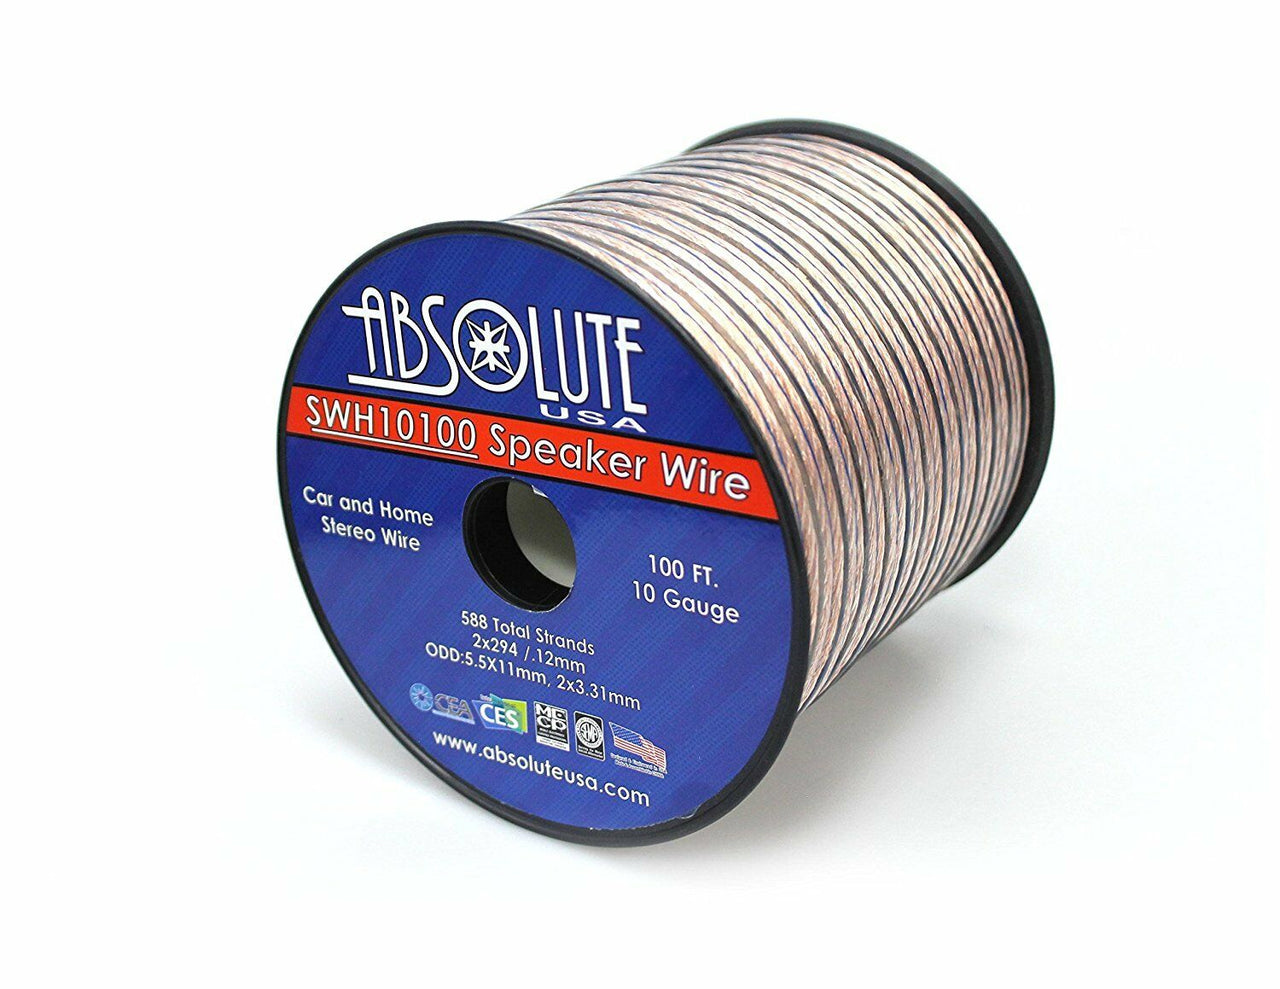 Absolute USA SWH10100 10 Gauge Car Home Audio Speaker Wire Cable Spool 100'